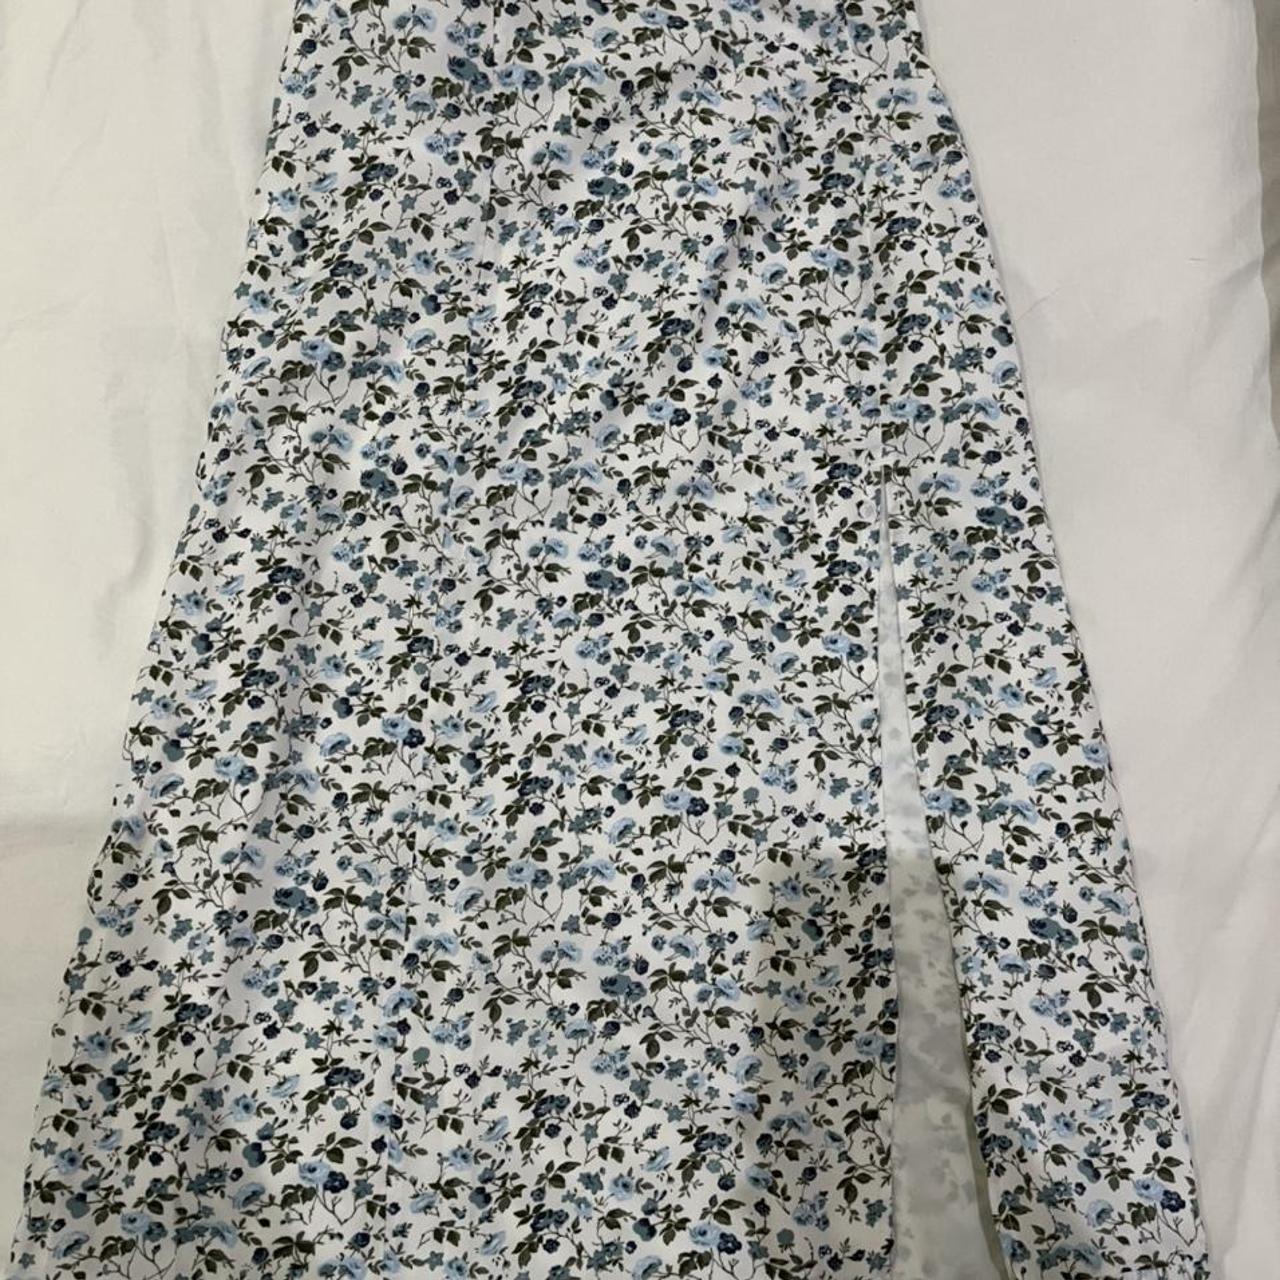 Abercrombie & Fitch Women's White and Blue Skirt | Depop